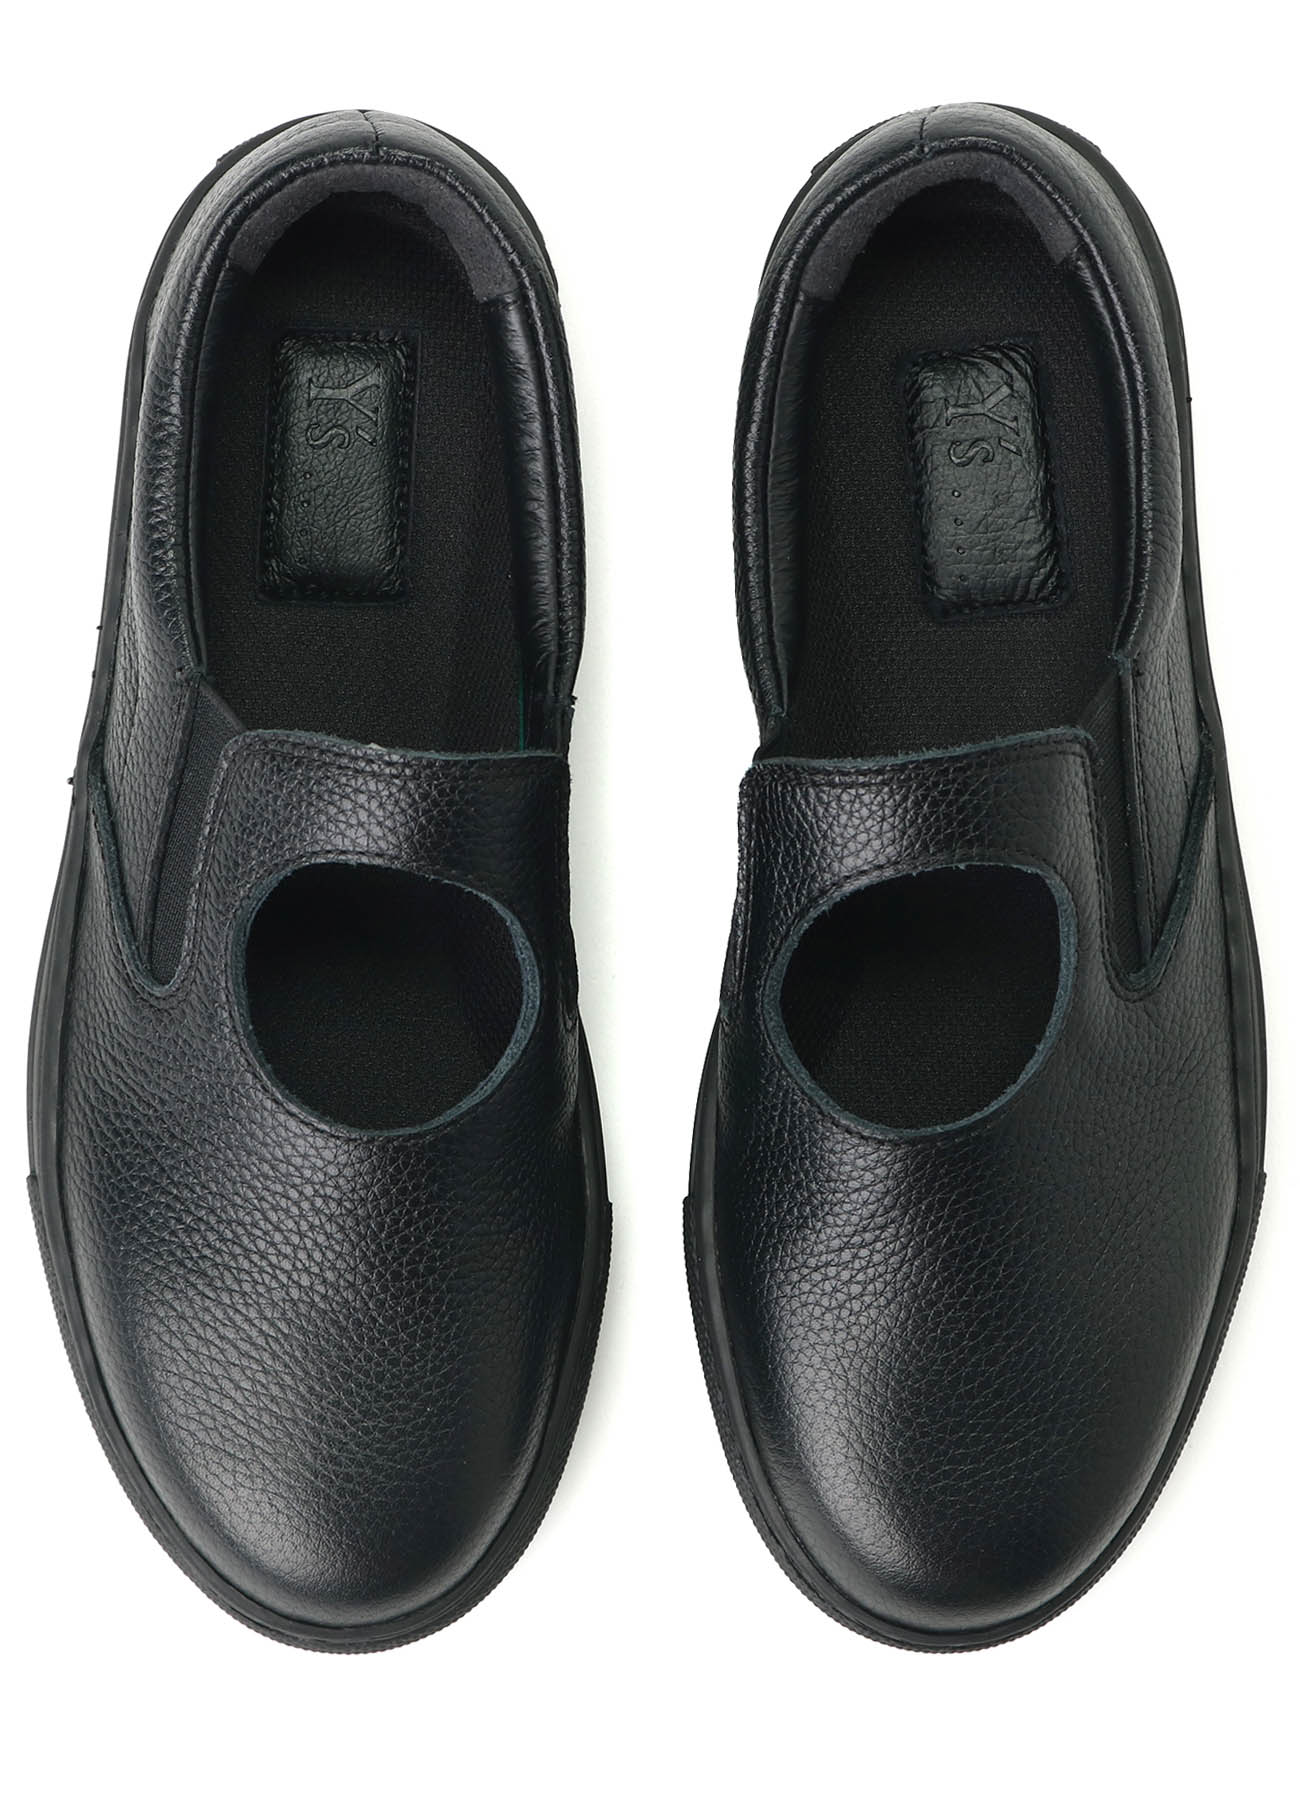 COW LEATHER SLIP ON SHOES